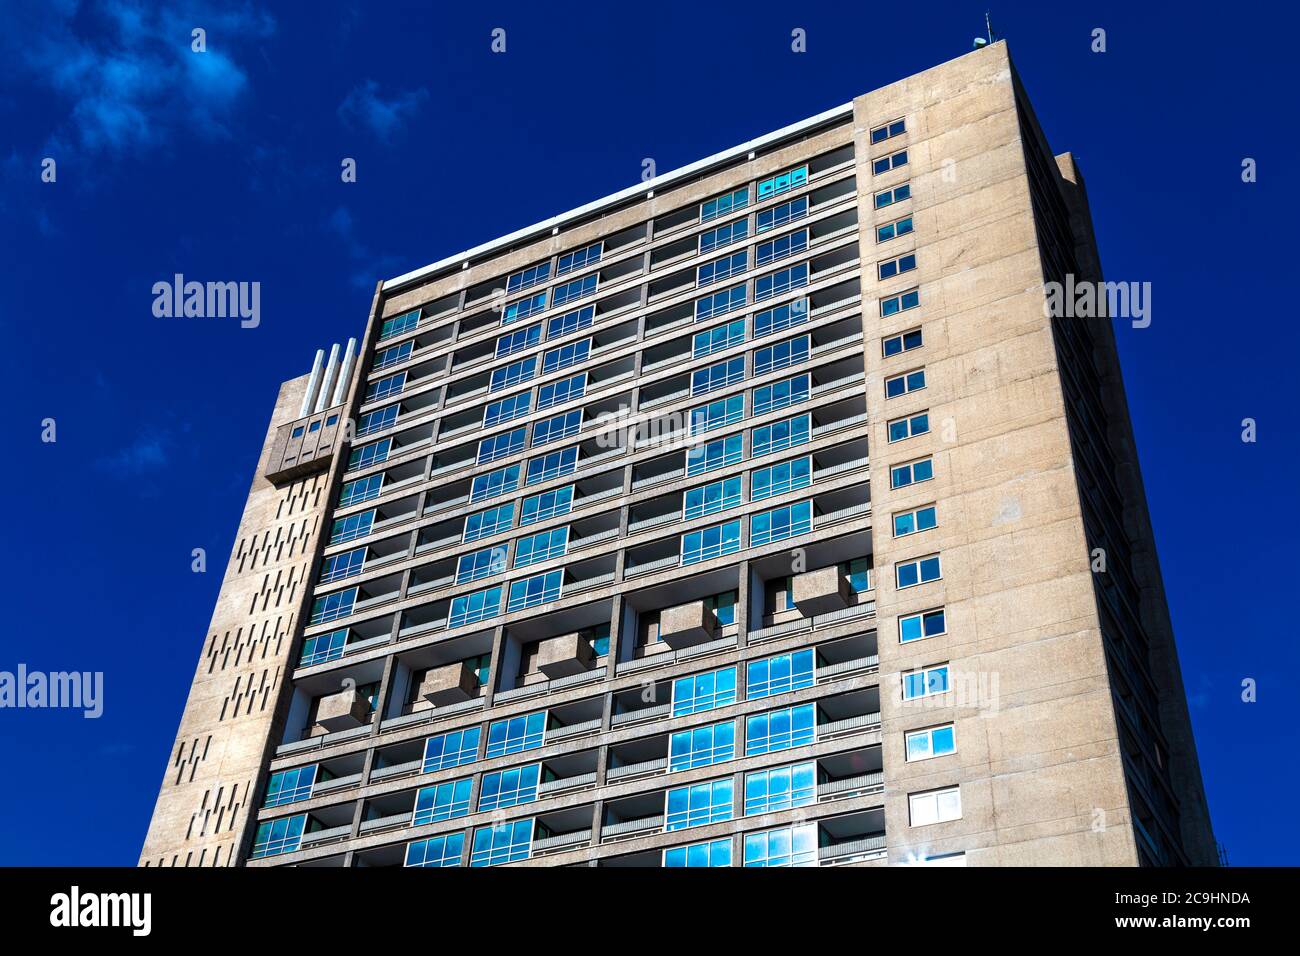 Brutalist style residential high-rise Balfron Tower by architect Ernő Goldfinger at the Brownfield Estate in London, UK Stock Photo